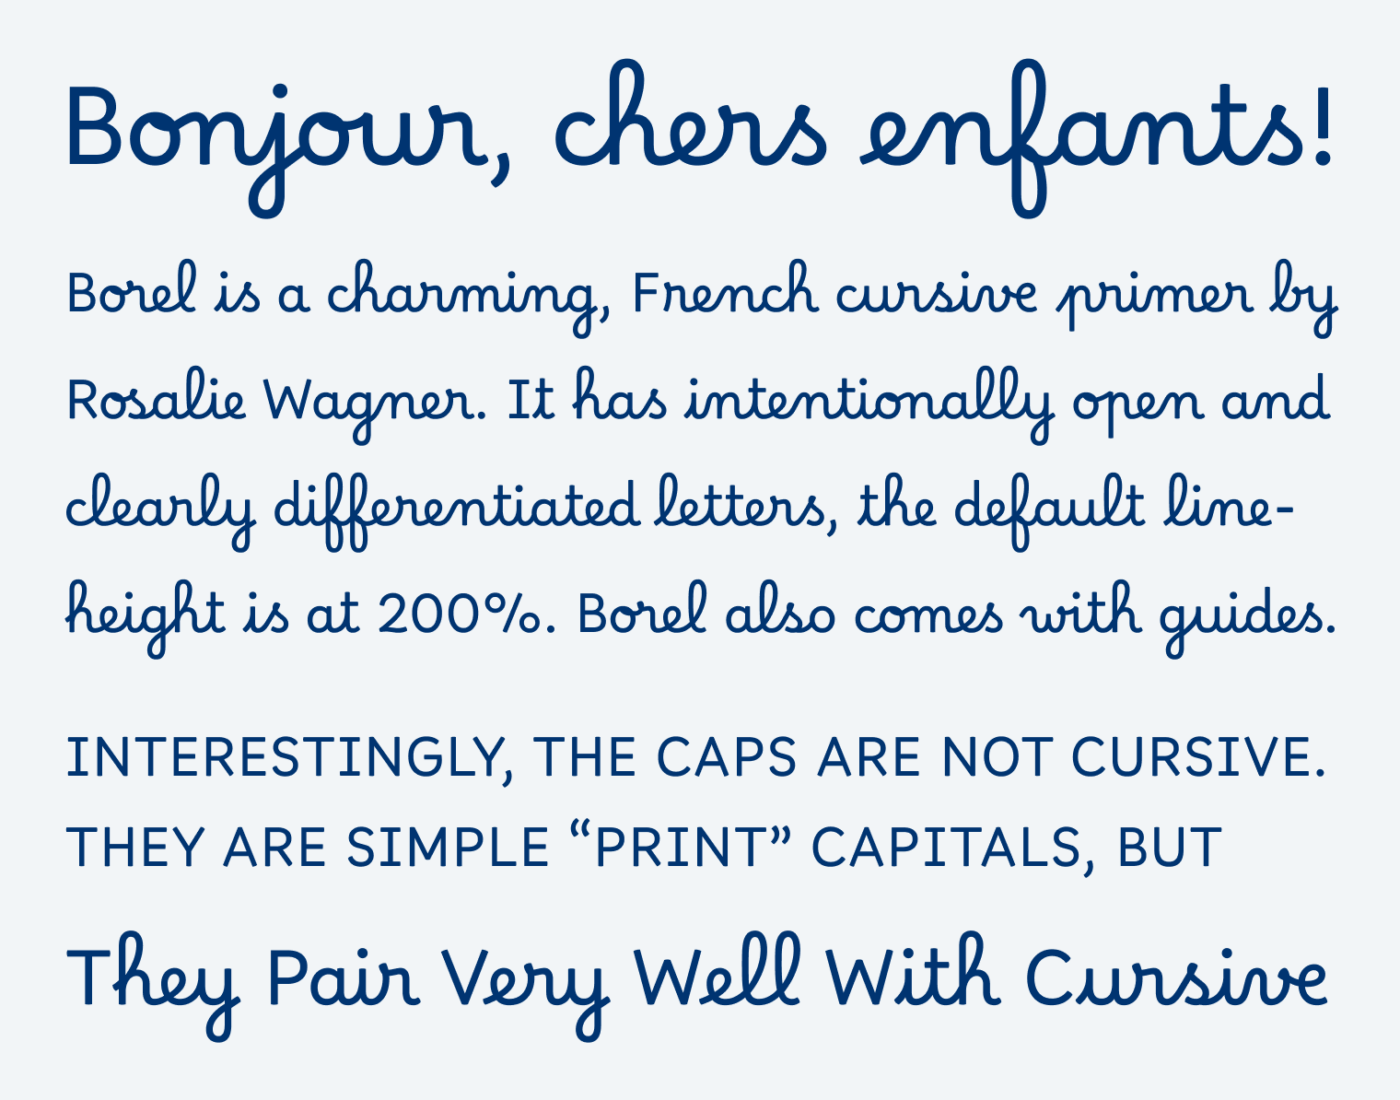 Bonjour, chers enfants! Borel is a charming, French cursive primer by Rosalie Wagner. It has intentionally open and clearly differentiated letters, the default line-height is at 200%. Borel also comes with guides. Interestingly, the caps are not cursive. They Are simple “Print” capitals, but they pair very well with cursive.